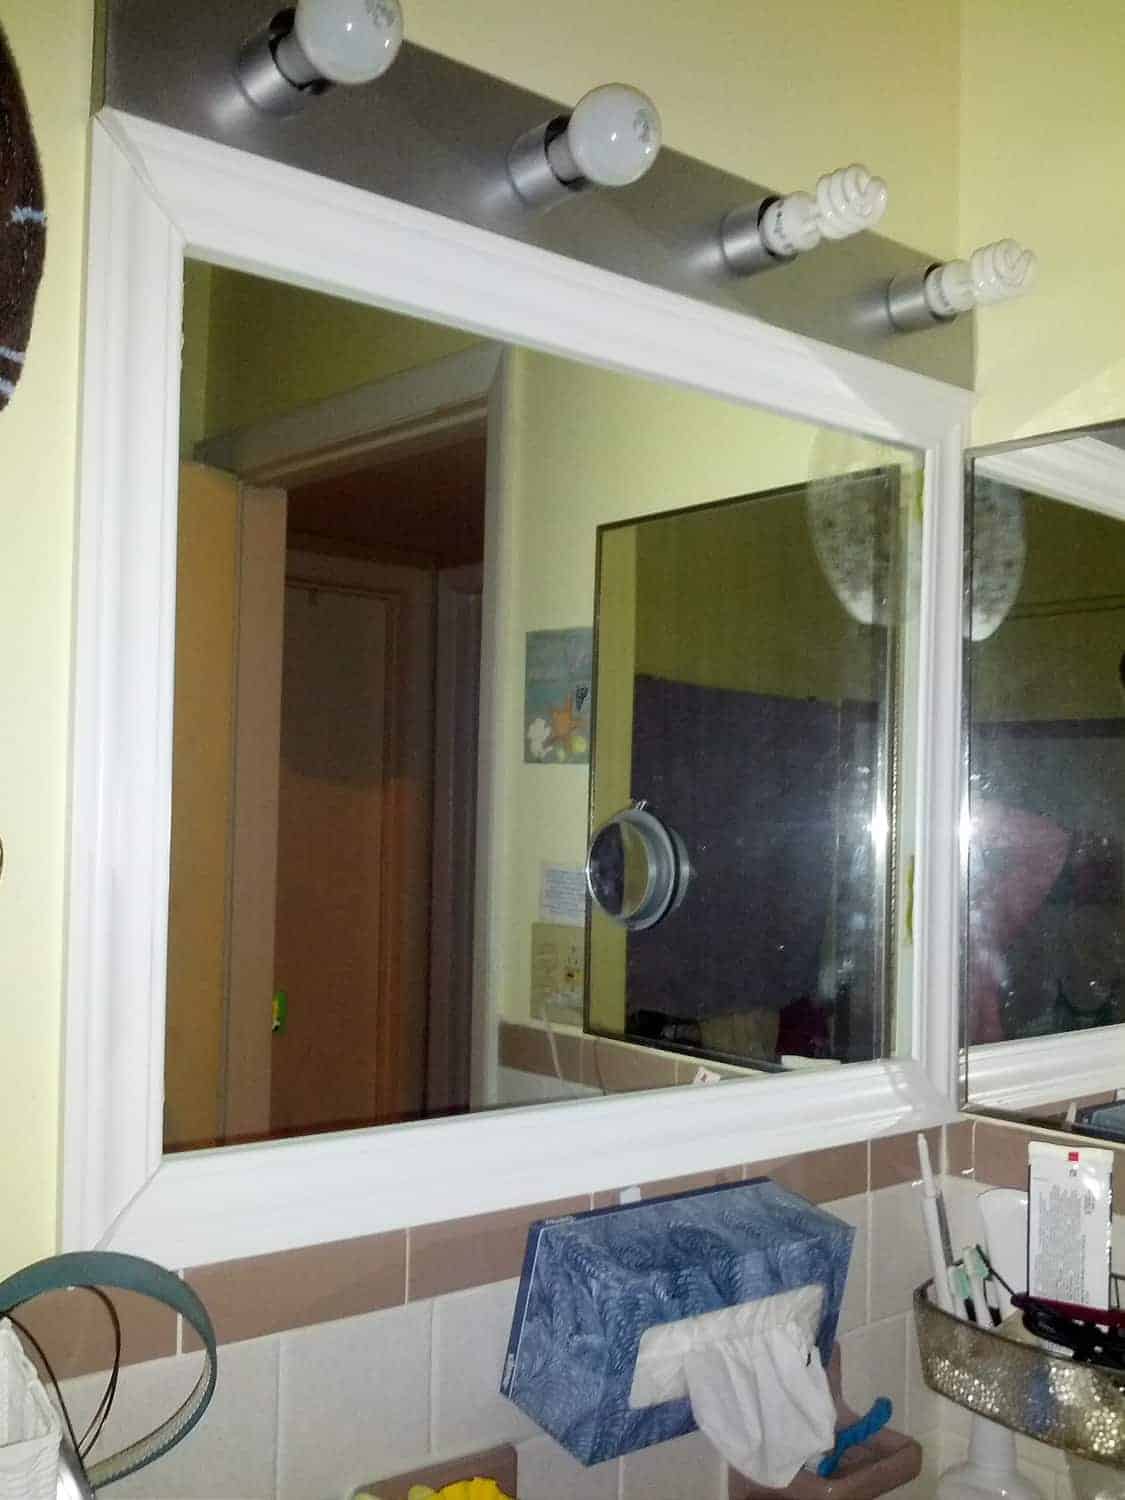 mirror with cut molding around it